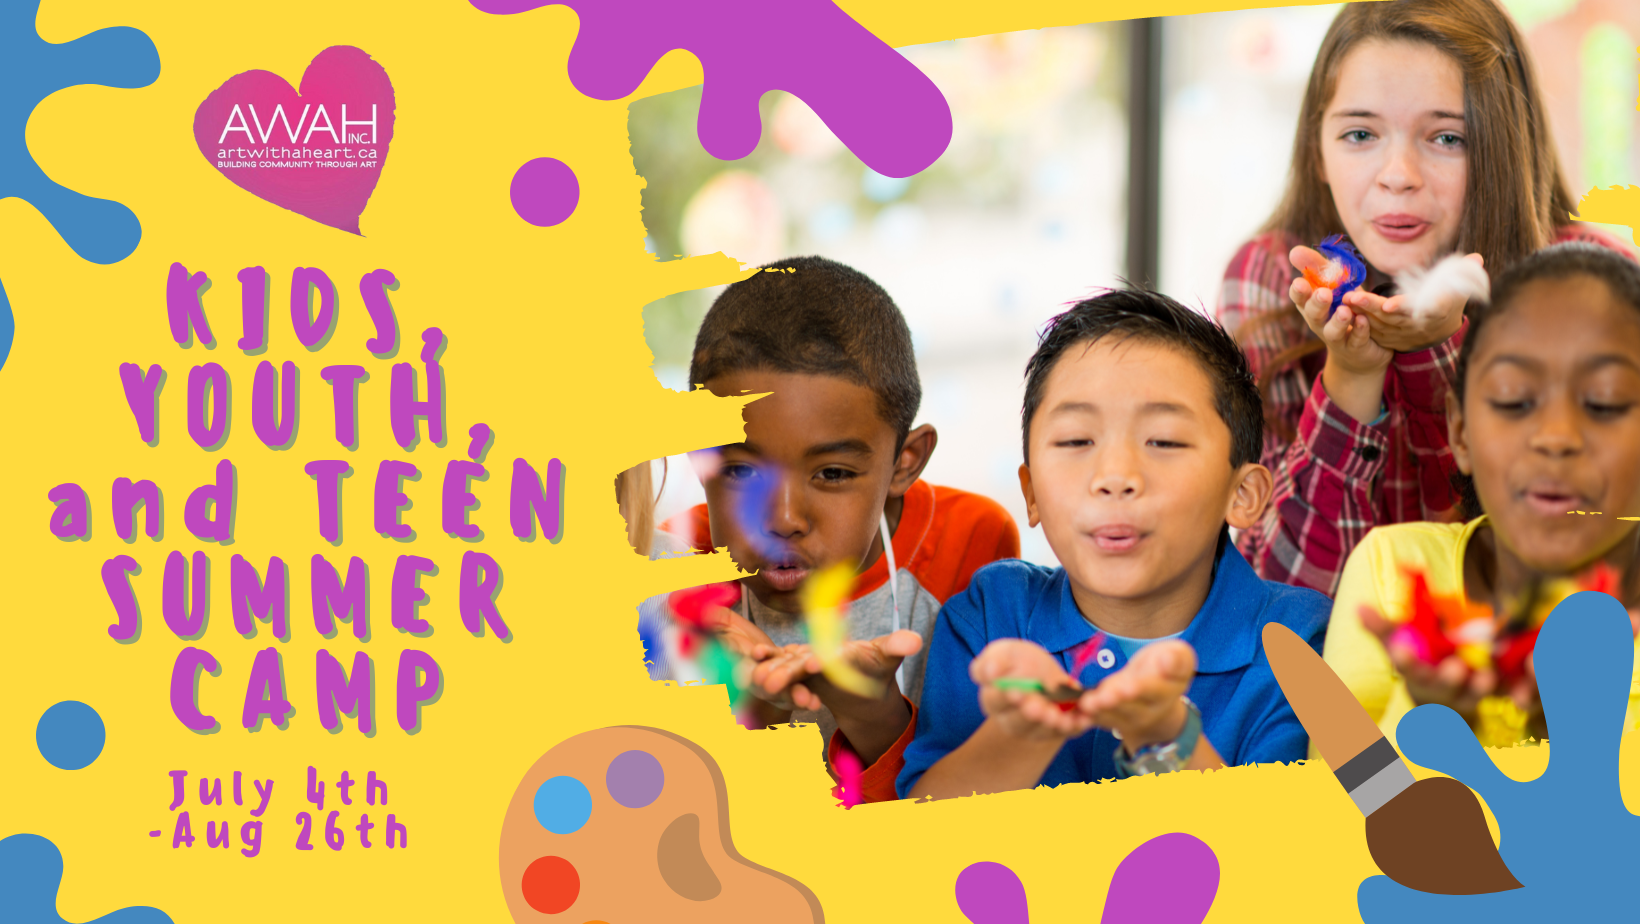 Promotional image for Art With A Heart Inc.'s Kids Expressive Arts Summer Camp from July 4th until August 26th, featuring a group of children blowing confetti.